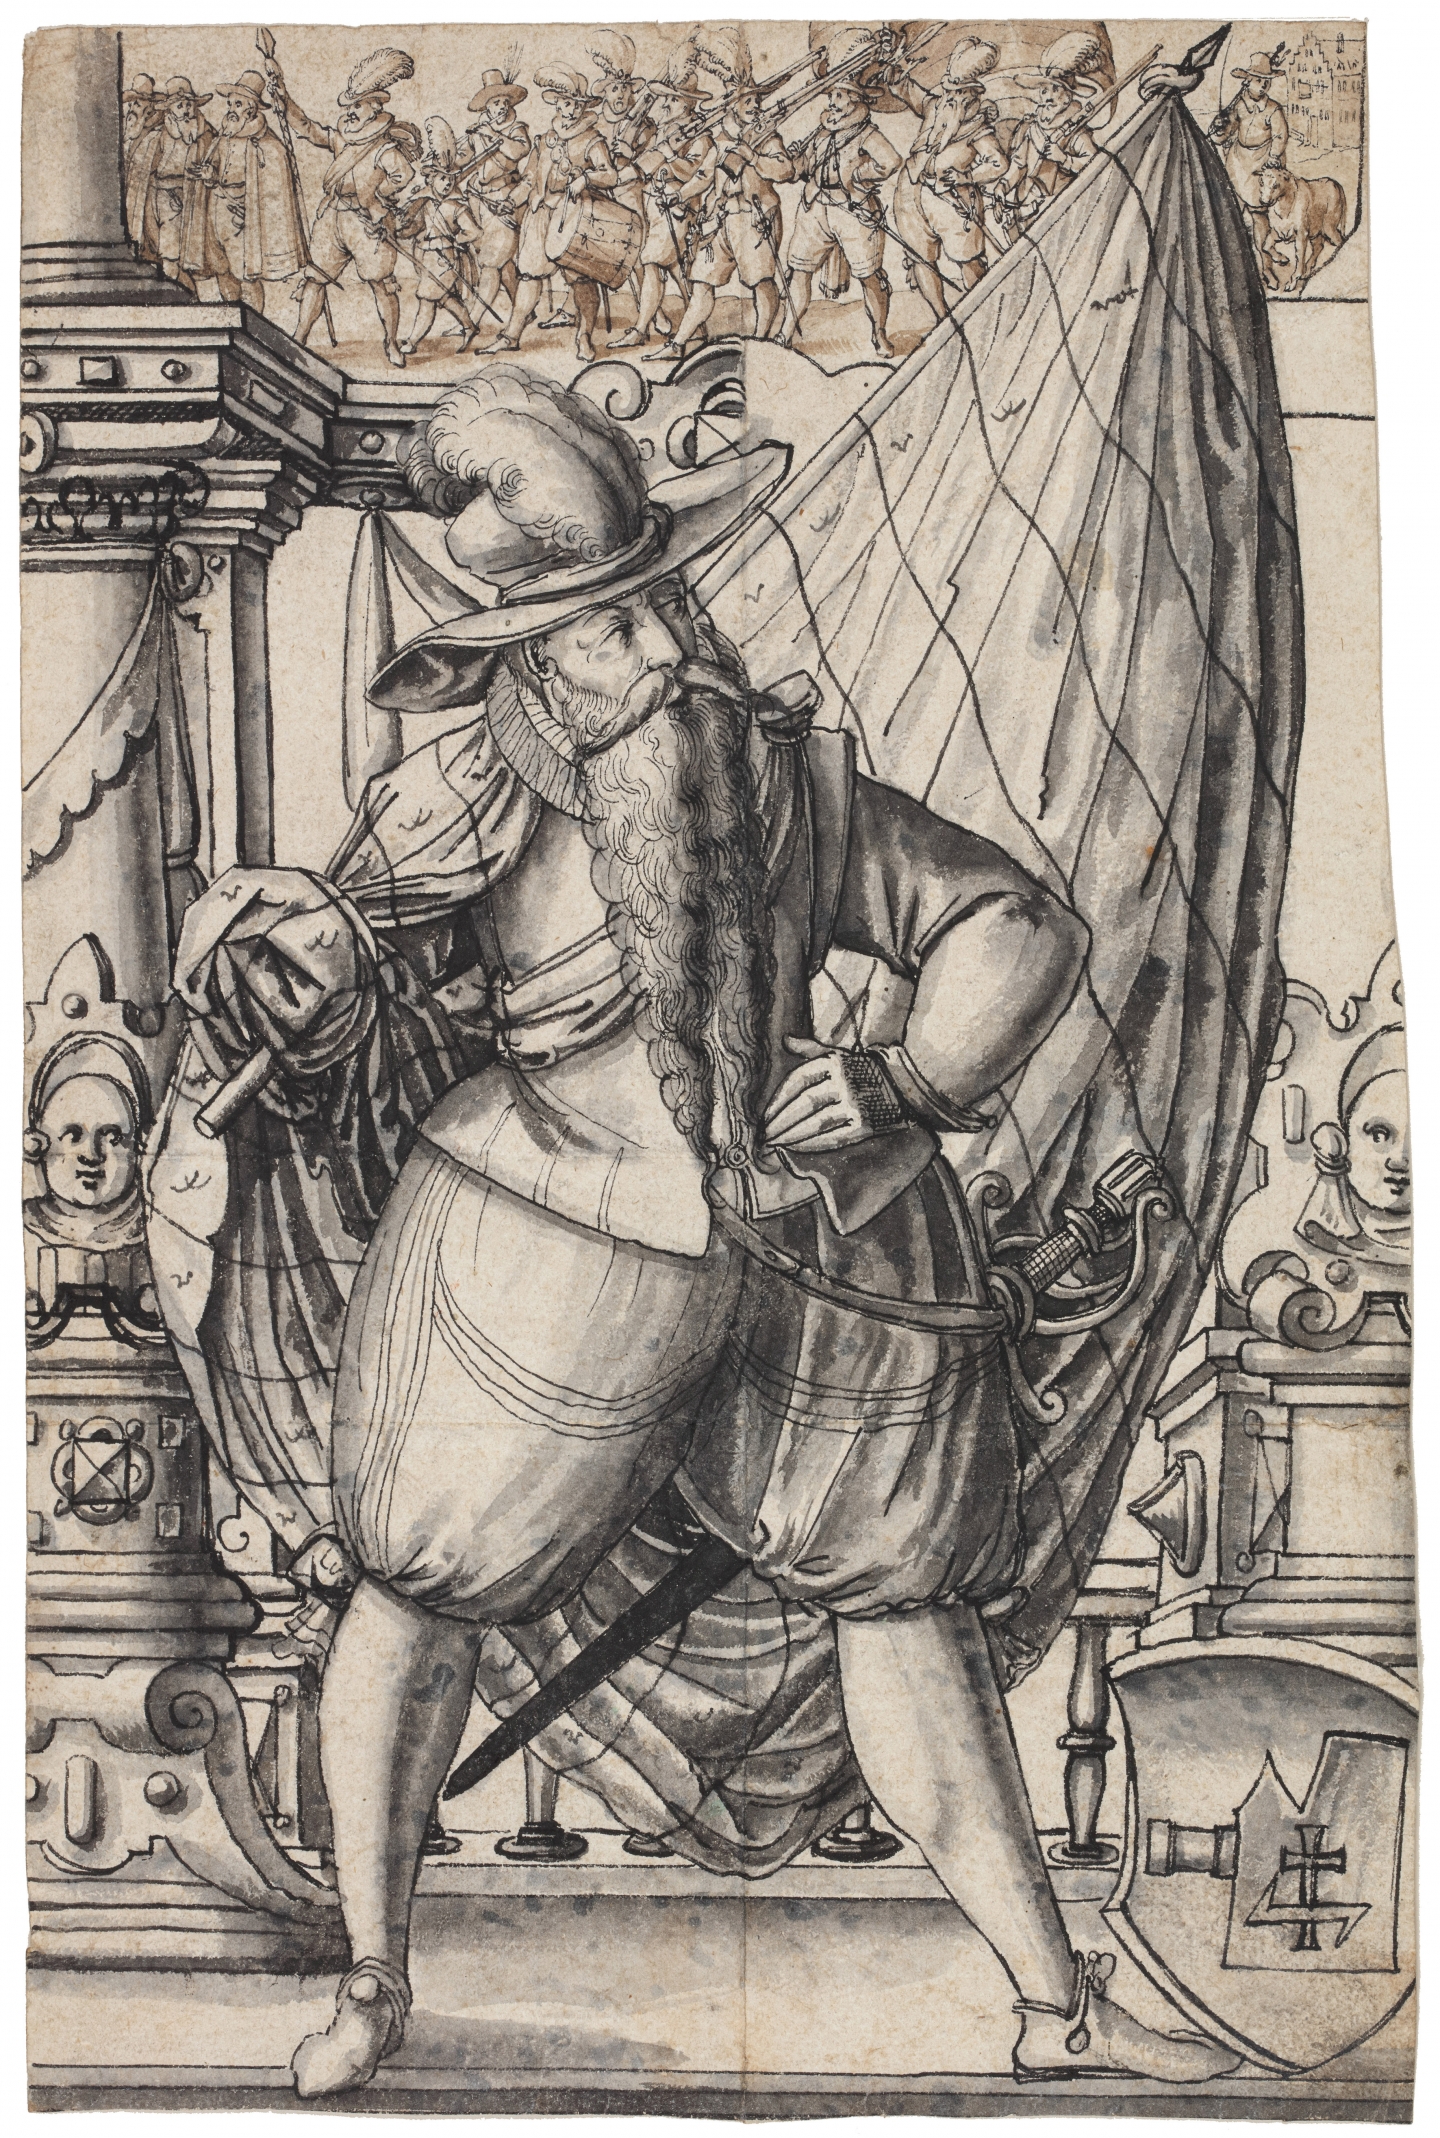 Friedrich Brentel (attr. to) (Lauingen 1580-1651 Strasbourg) and Bartholomäus Lingg (attr. to)(Zug 1555/60-after 1633 Strasbourg) A standard-bearer with a frieze of soldiers